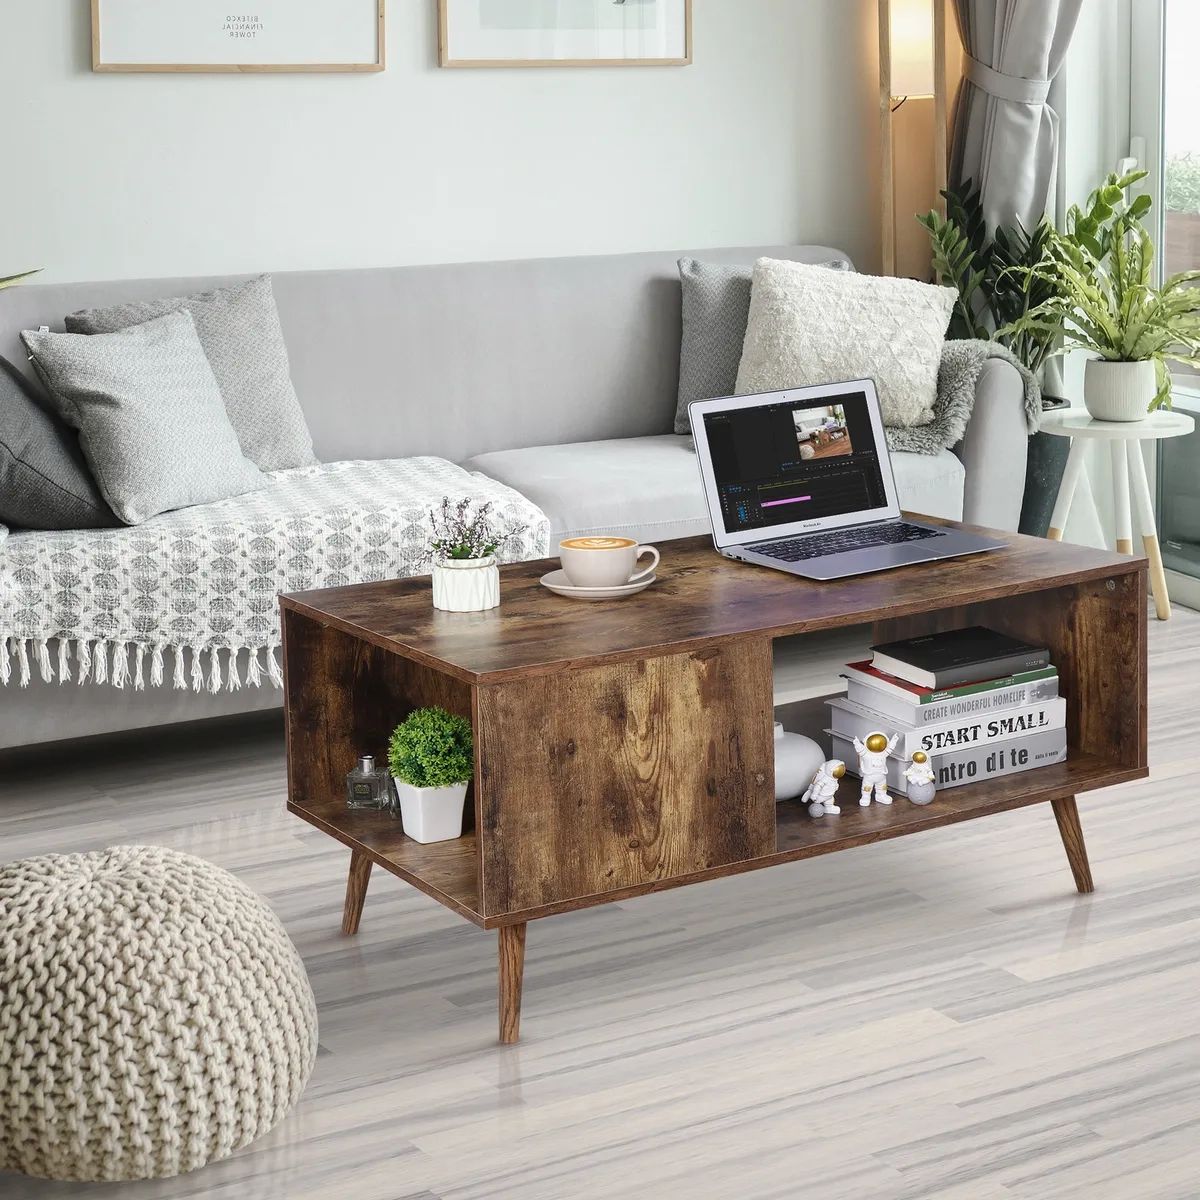 Modern Coffee Table Rectangular Wood With Open Storage Shelf Stand Living  Room | Ebay For Coffee Tables With Open Storage Shelves (View 2 of 15)